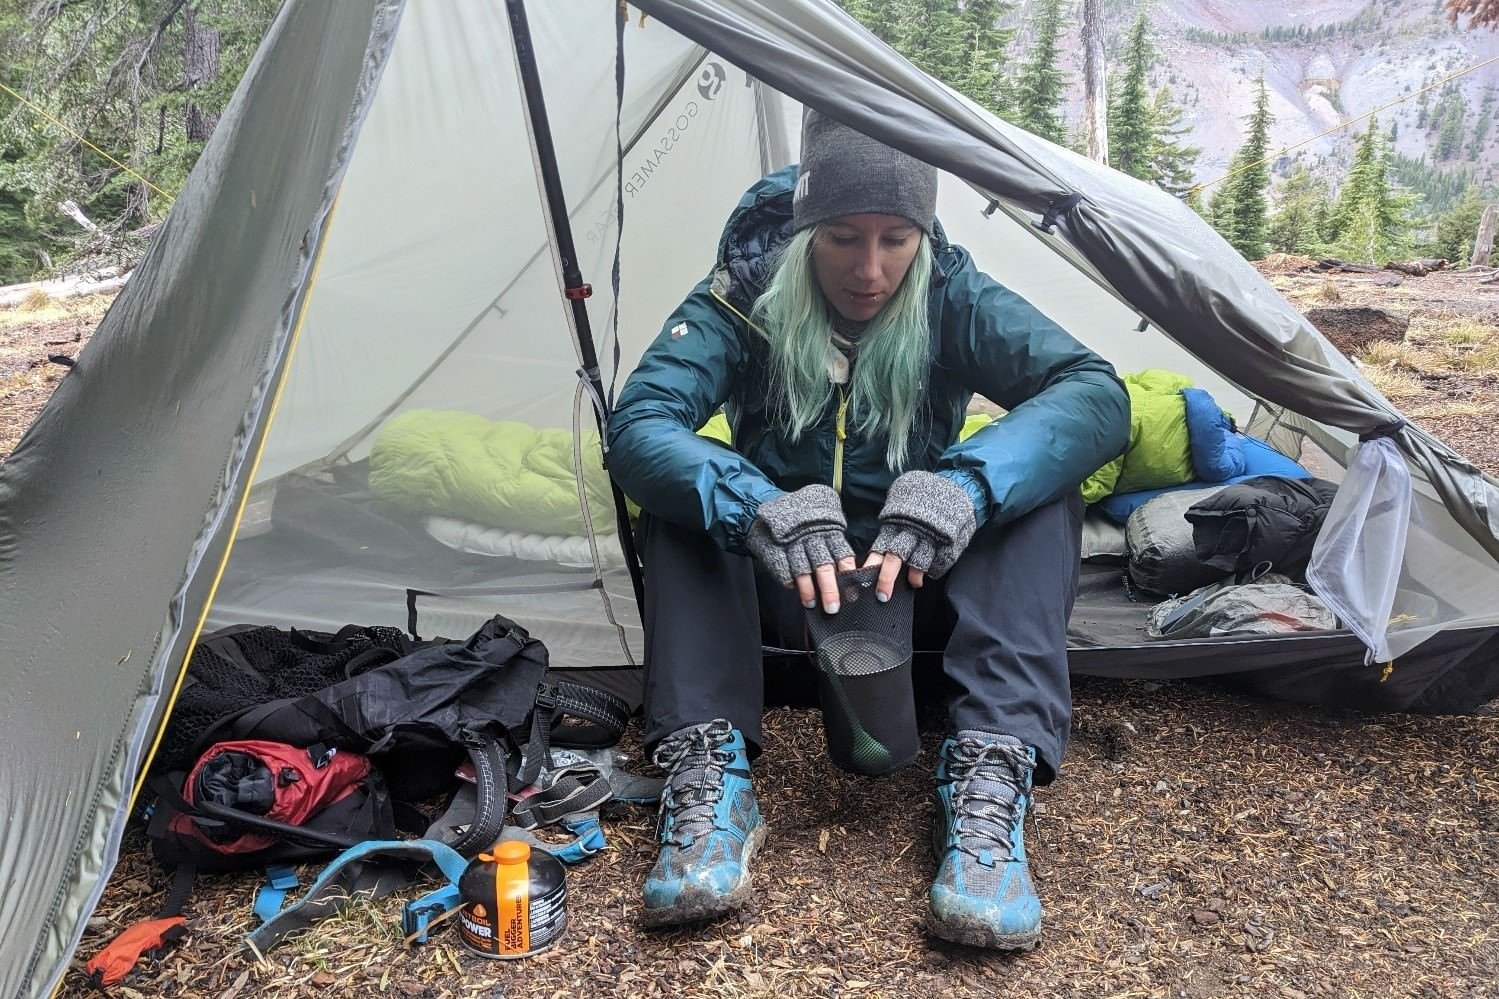 A hiker sitting in the doorway of the Gossamer Gear The Two with their gear in the vestibule